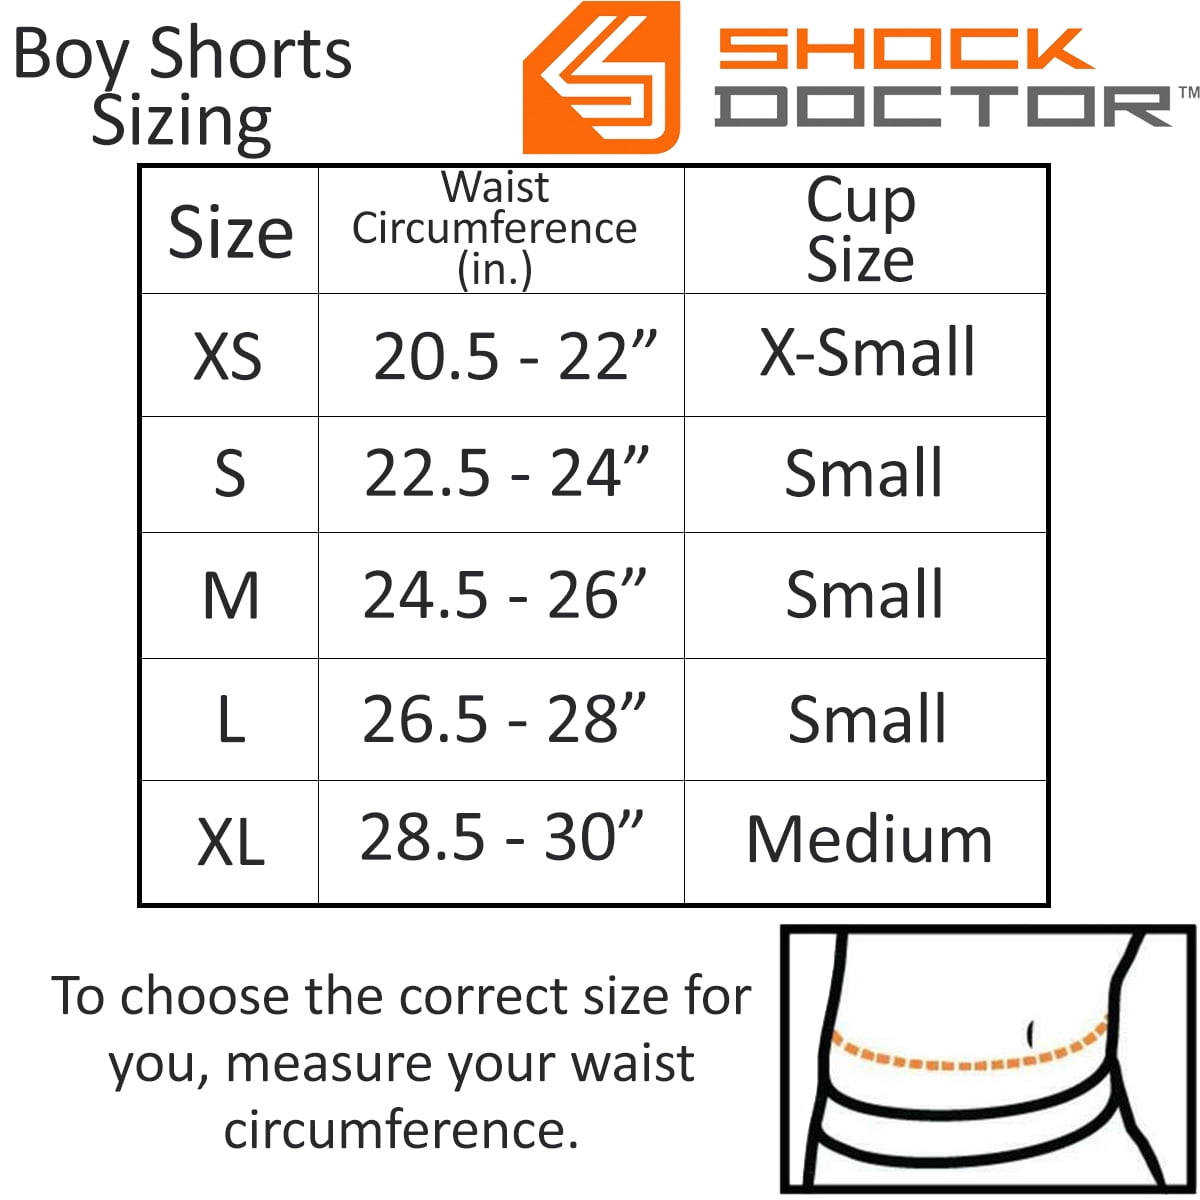 Shock Doctor Compression Shorts with Cup Pocket - Athletic Supporter -  Underwear with Pocket (Cup NOT Included) - White, Boys - Small 